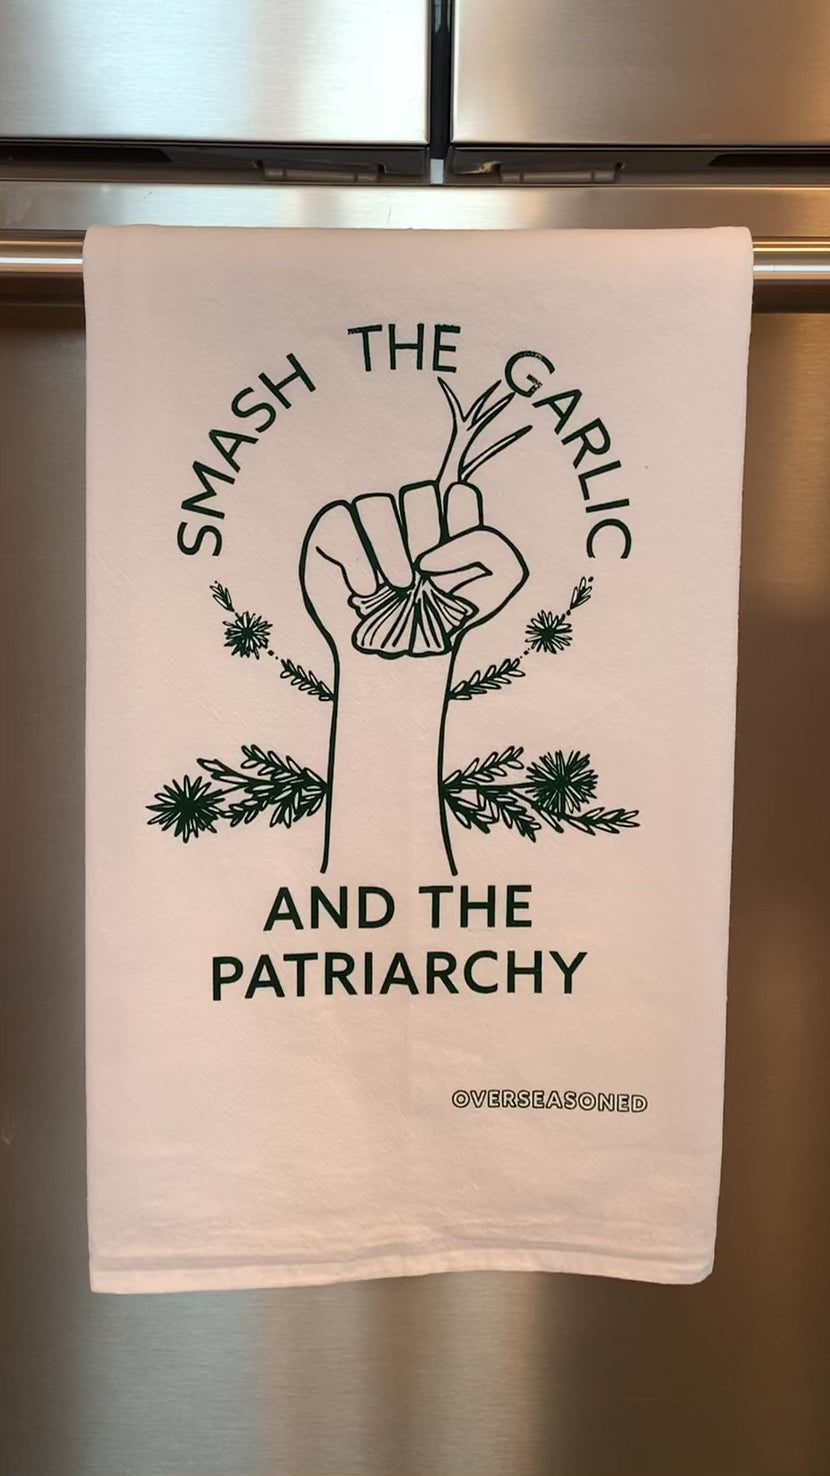 A white tea towel with green lettering that reads "Smash the Garlic and the Patriarchy" and a garlic illustration hangs in a kitchen